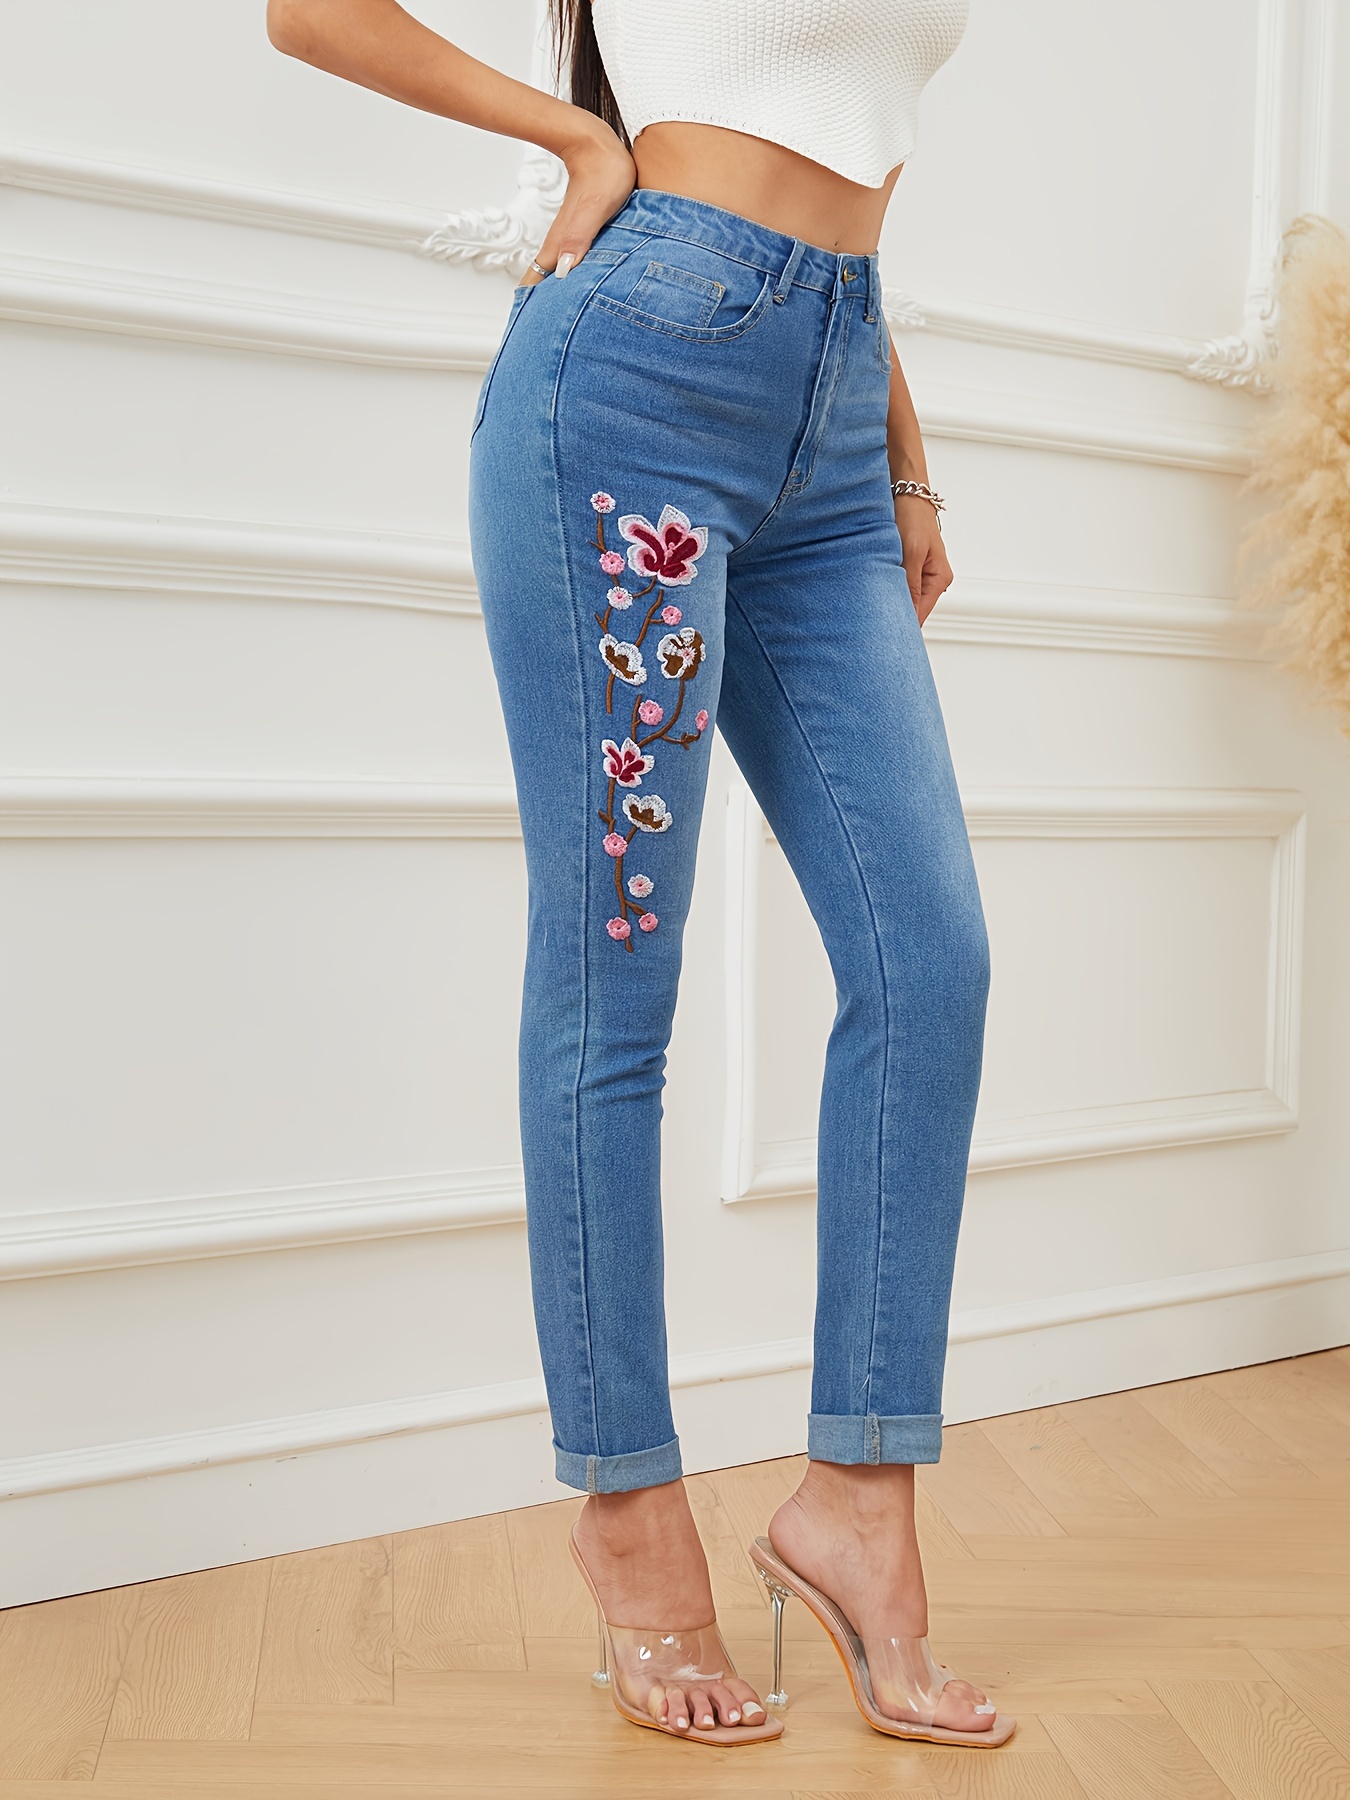 Waisted Stretch Jean Leggings Lace Trin Elastic Sliming Cropped